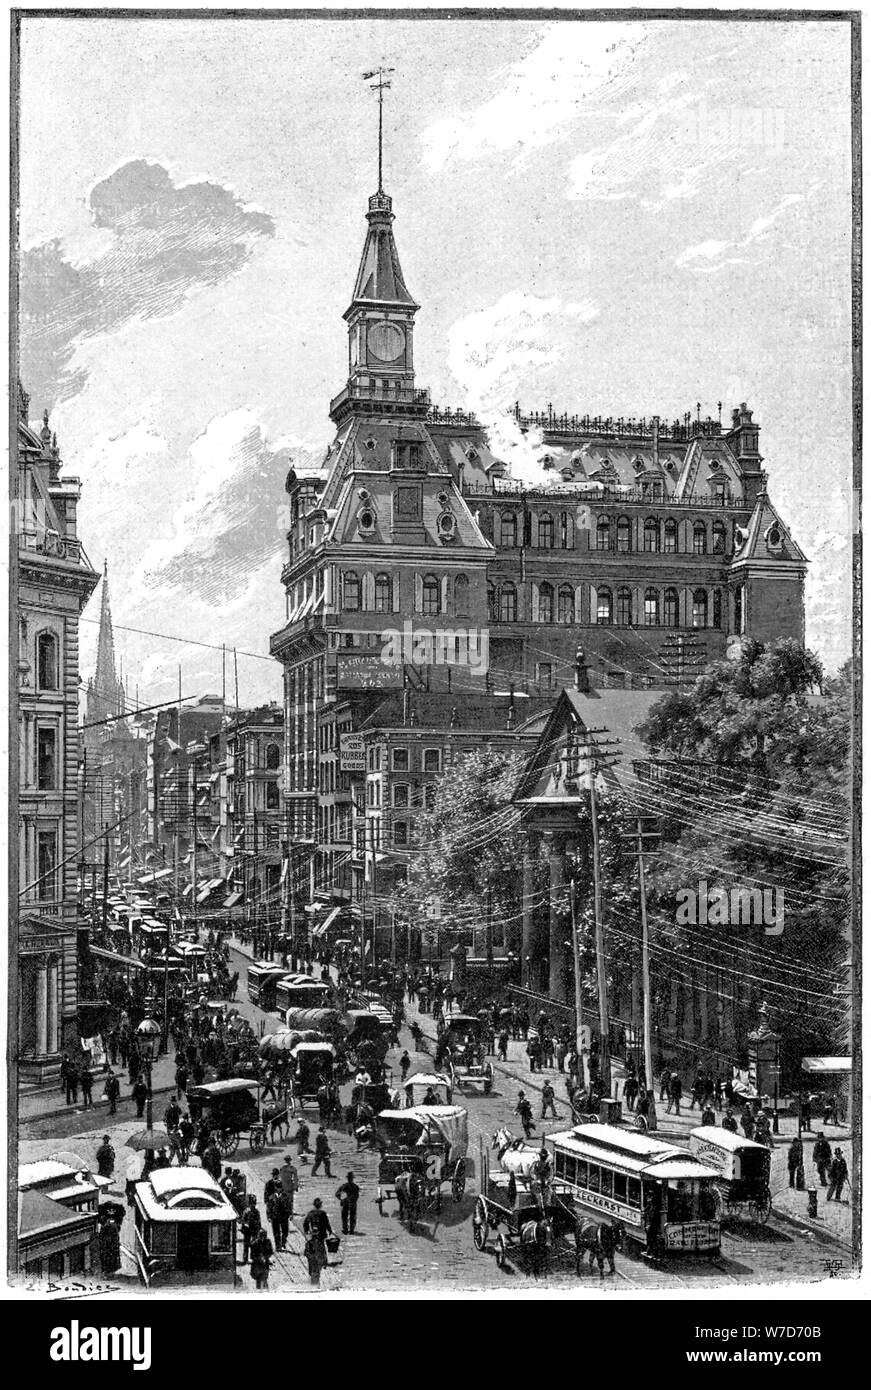 The Western Union Telegraph Company's buildings, Broadway and Dey Street, New York, 1892.Artist: Boudier Stock Photo